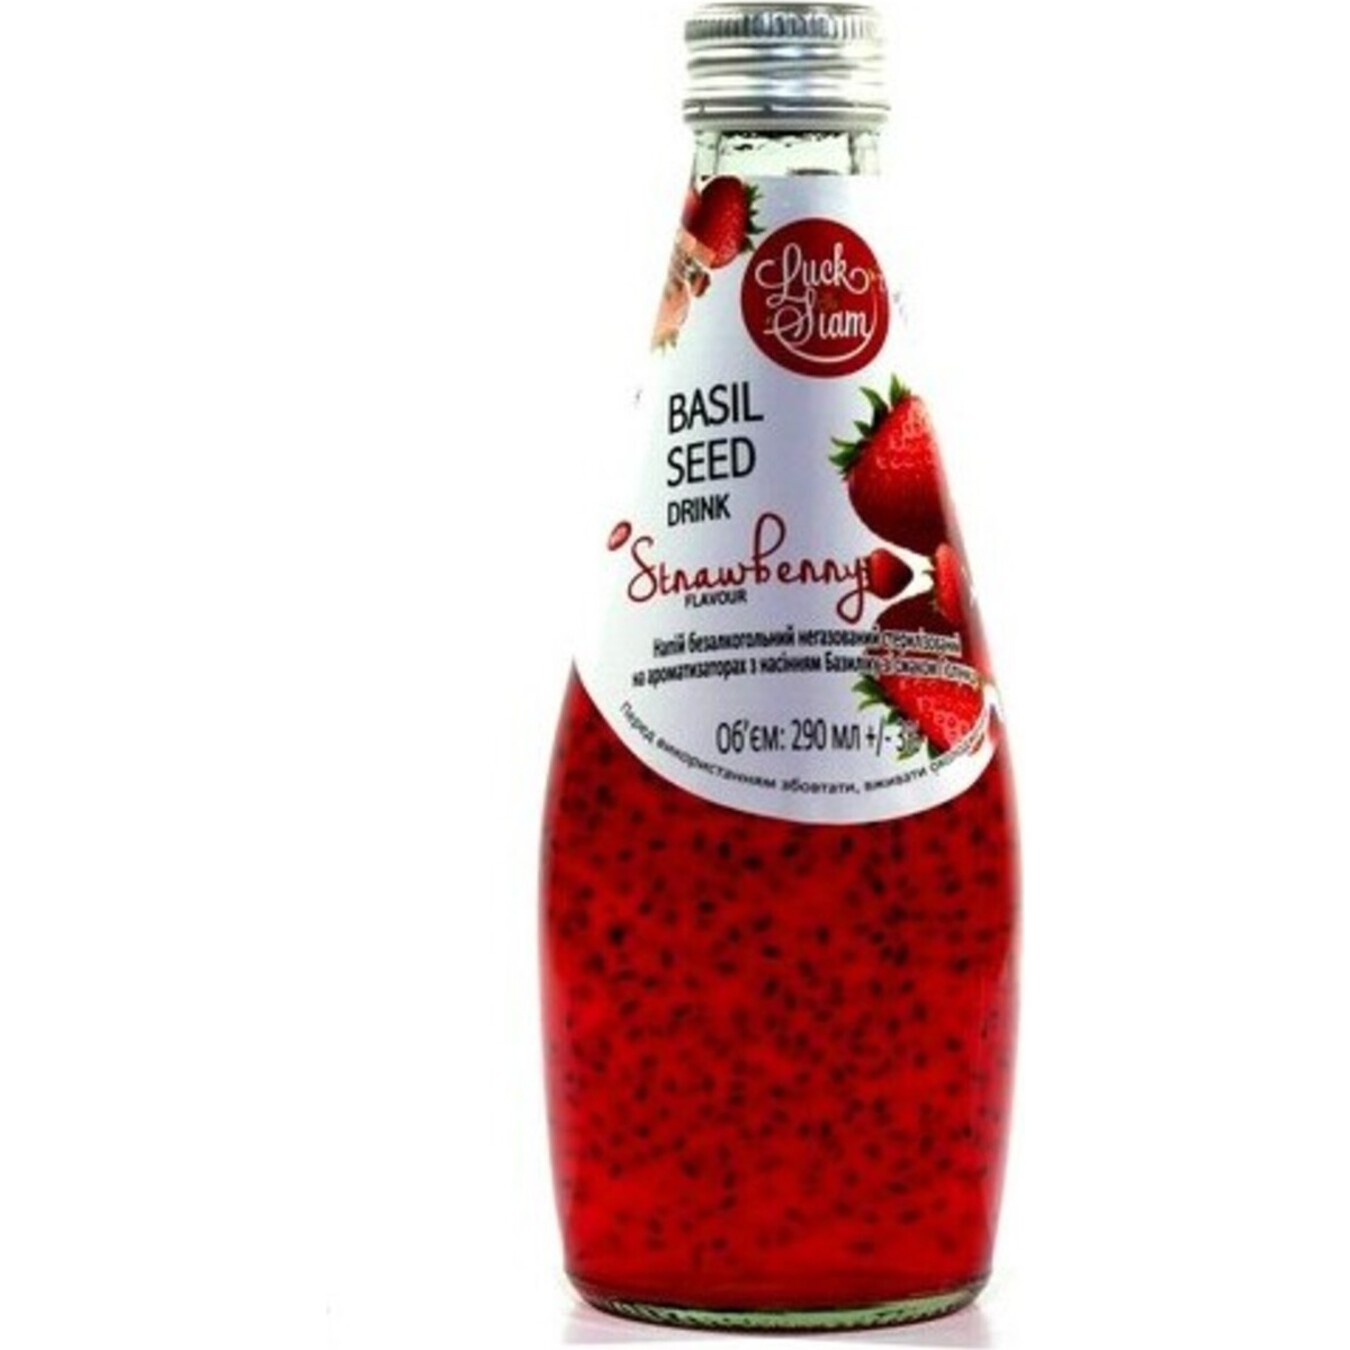 Luck Siam Strawberry Non-Carbonated Drink with Basil Seeds 290ml